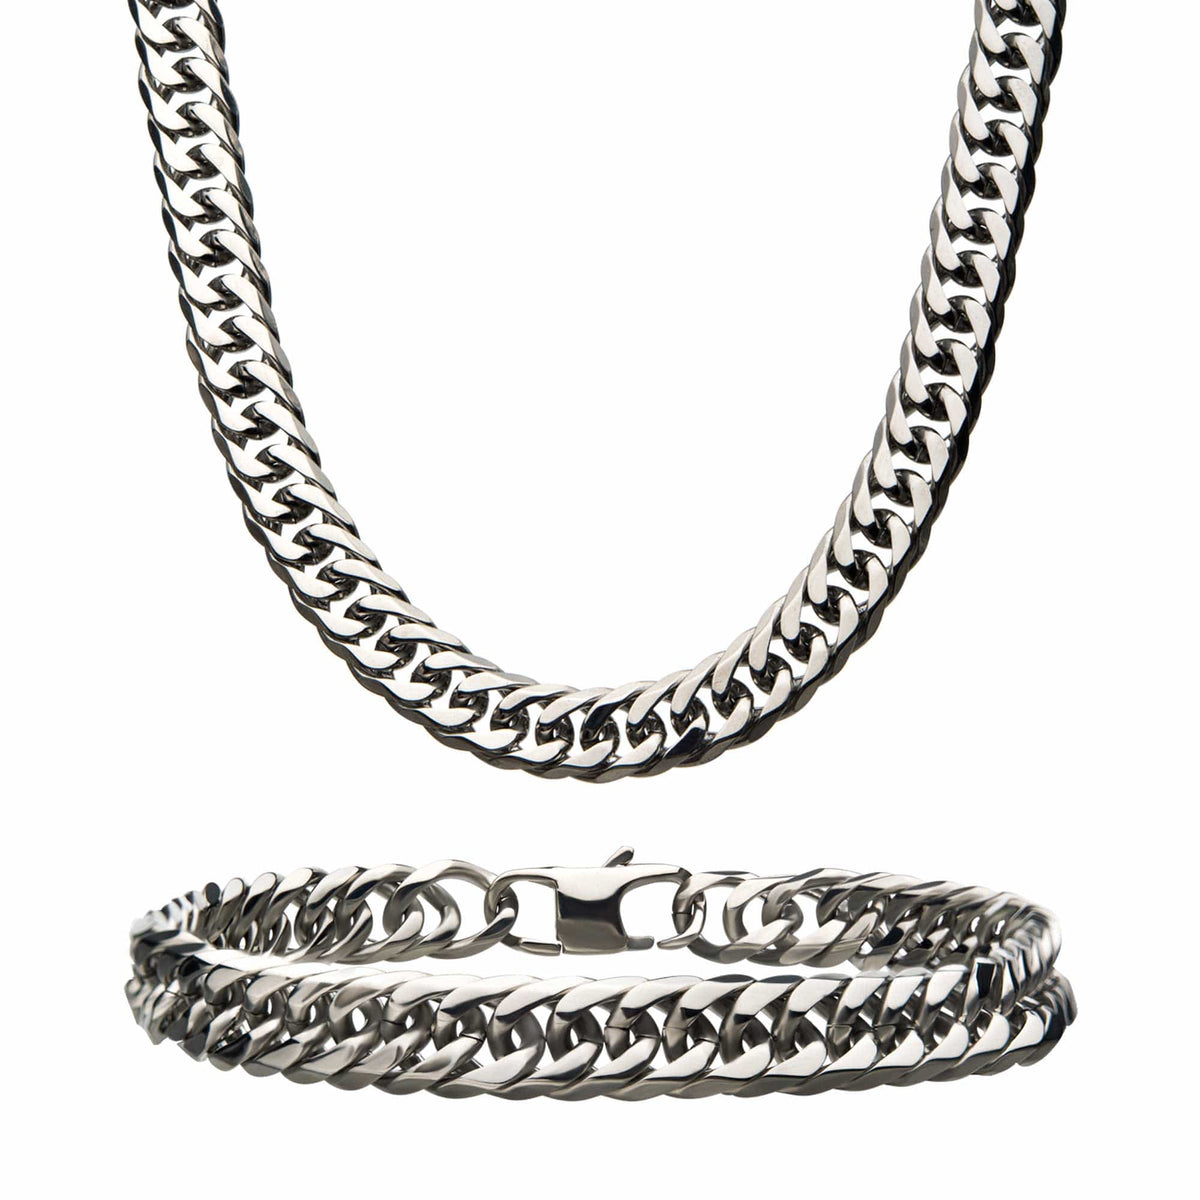 INOX JEWELRY Chains Silver Tone Stainless Steel 8mm Double Curb Chain and Bracelet Set NSTC0508-SET